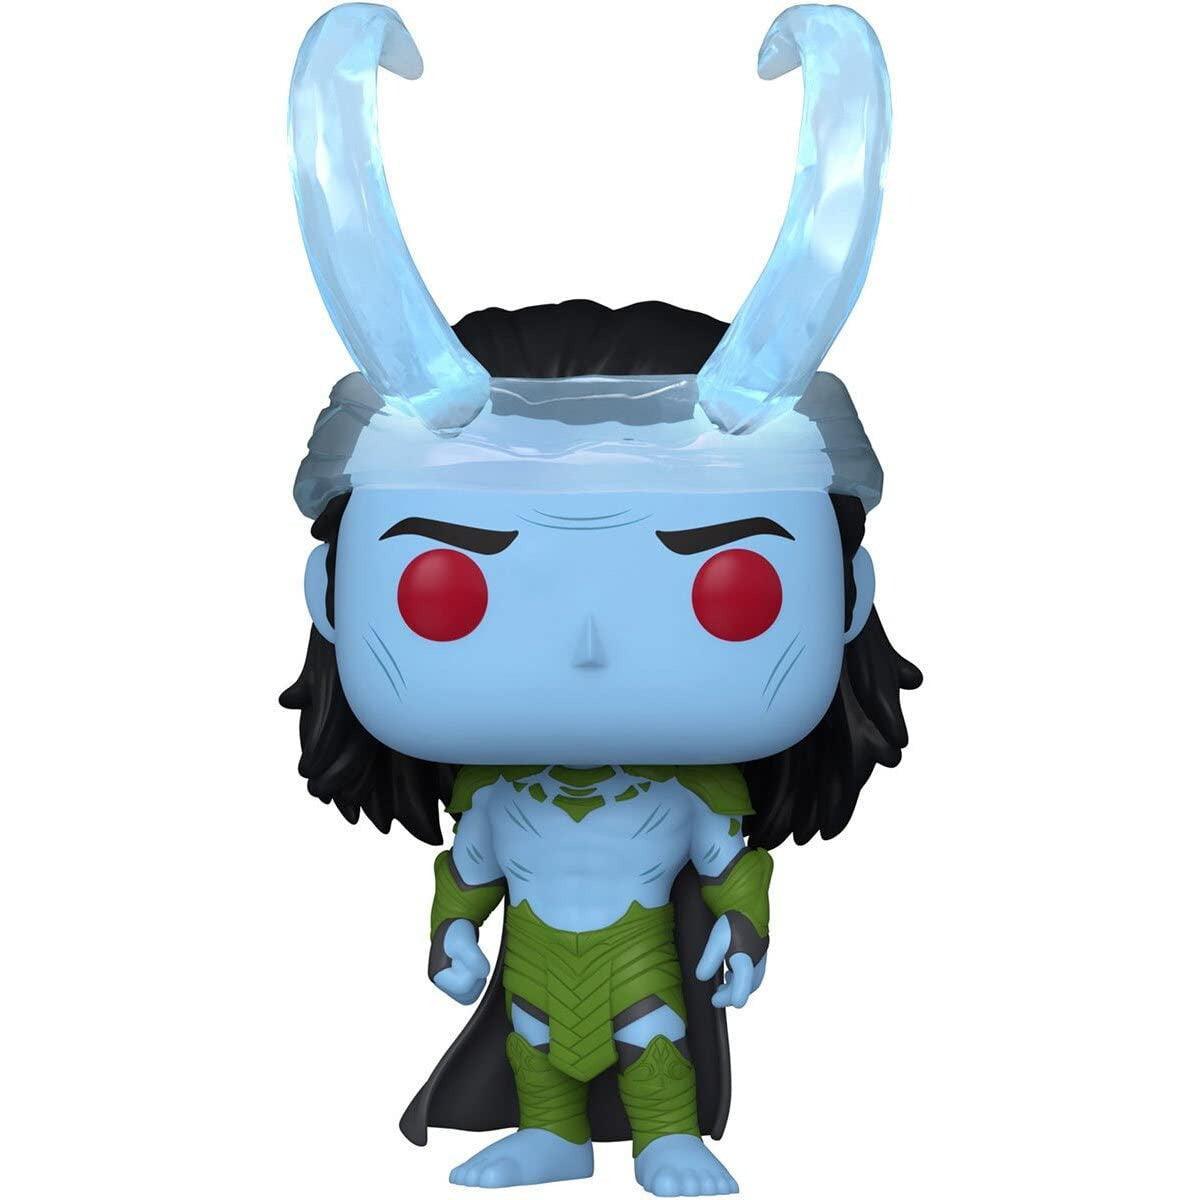 Funko POP Pop! Marvel: What If? - Frost Giant Loki Multicolor - BumbleToys - 18+, 4+ Years, 5-7 Years, Action Figures, Boys, Characters, Funko, Loki, Marvel, Pre-Order